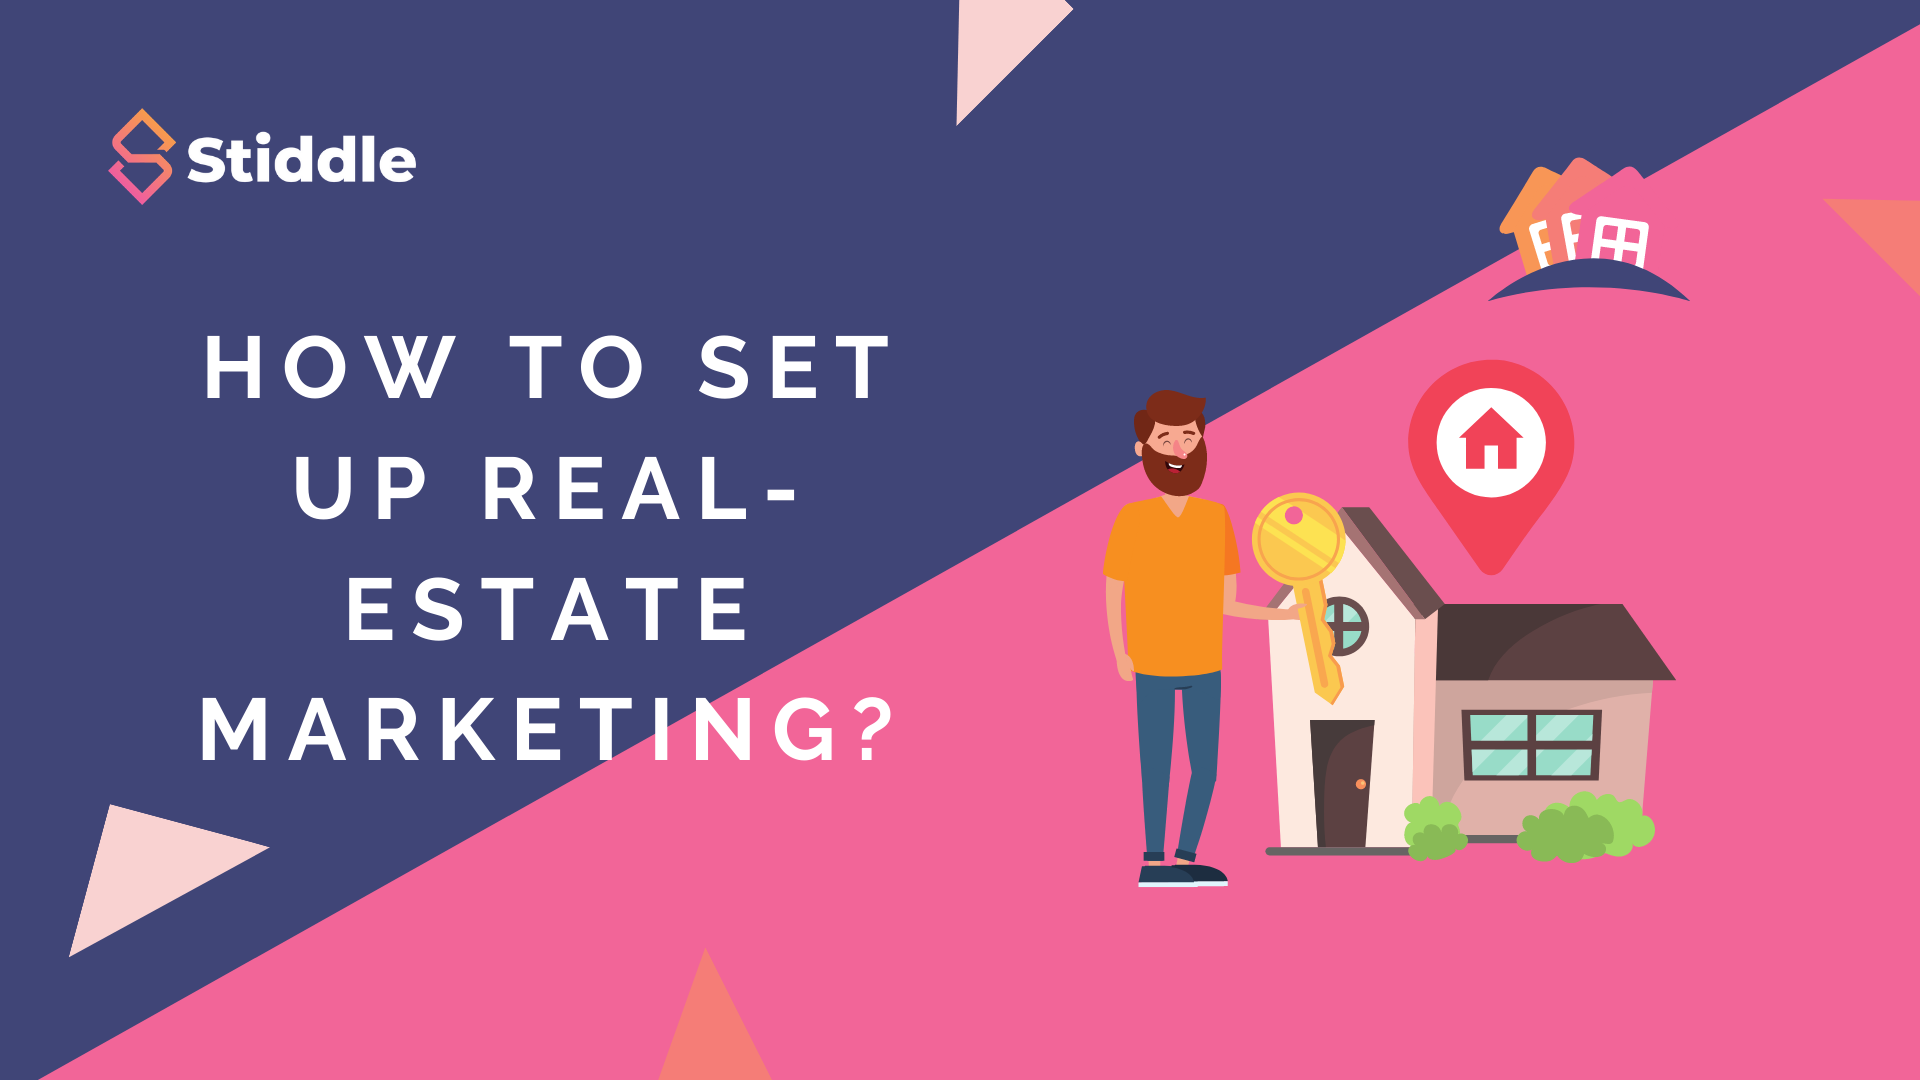 How to set up real-estate marketing?